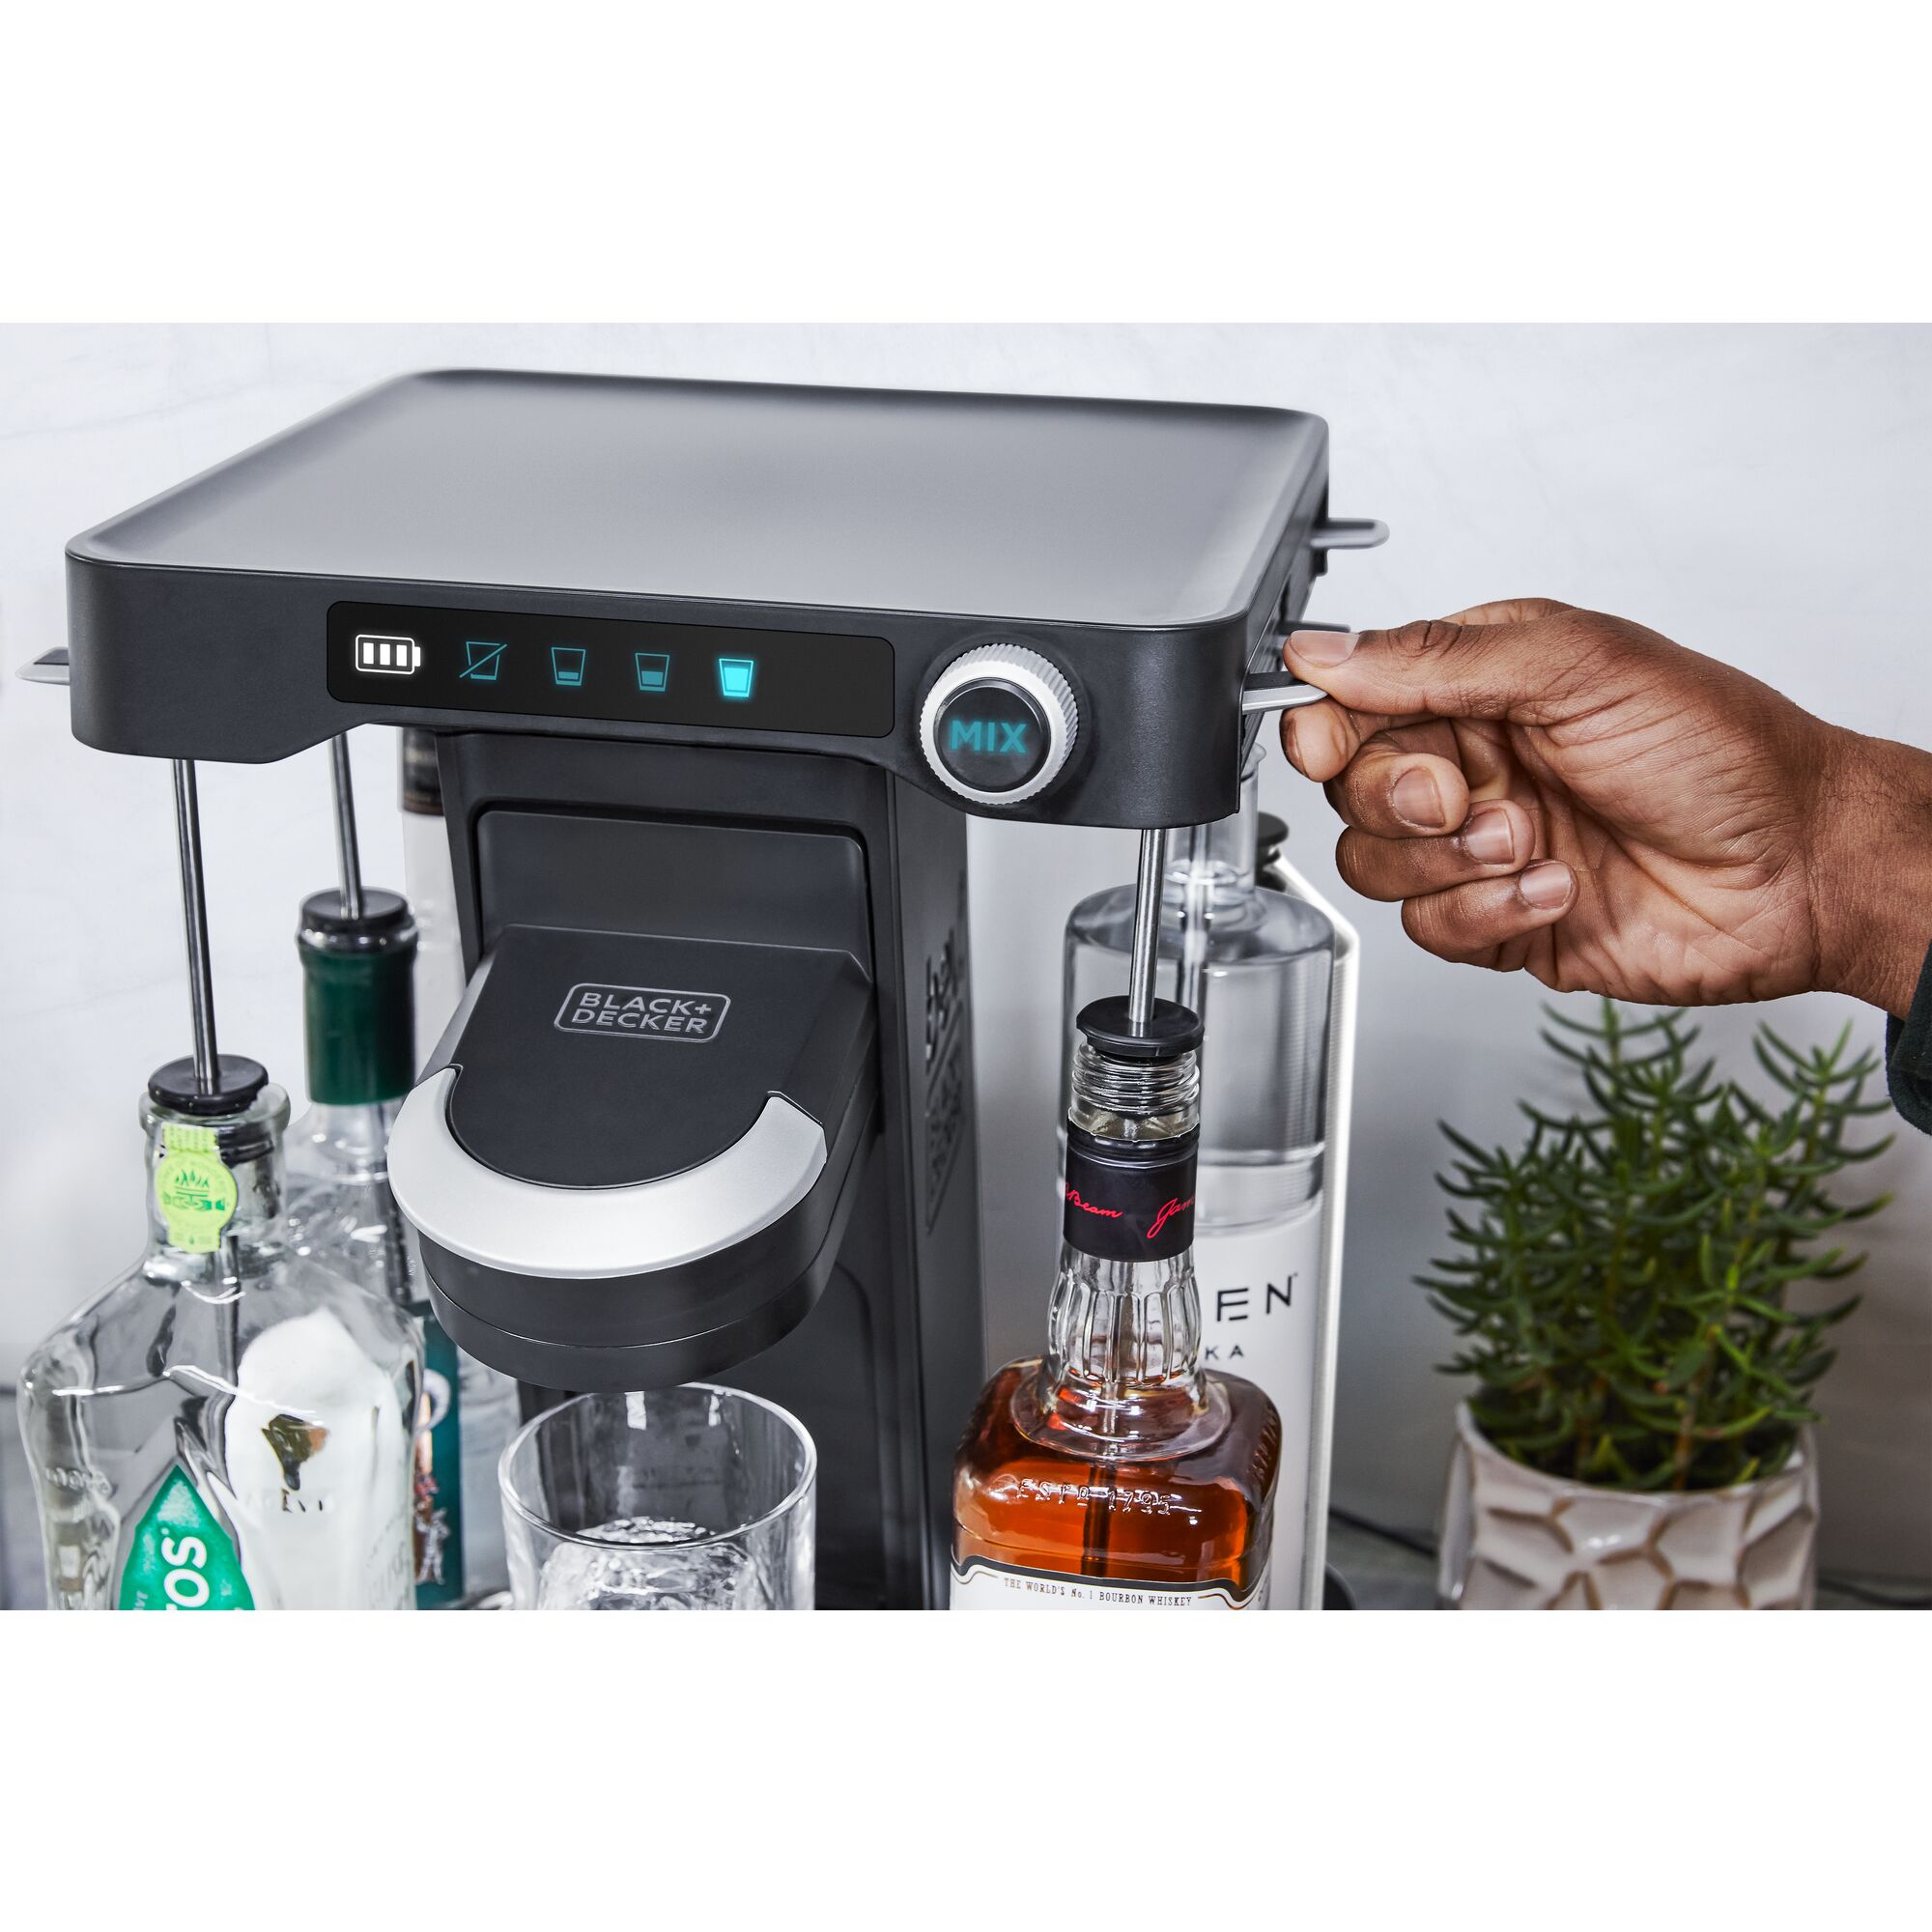 close-up, in the kitchen, of a man's hand loading a bottle of whiskey into the easy load liquor system on the bev by BLACK+DECKER™ cocktail maker